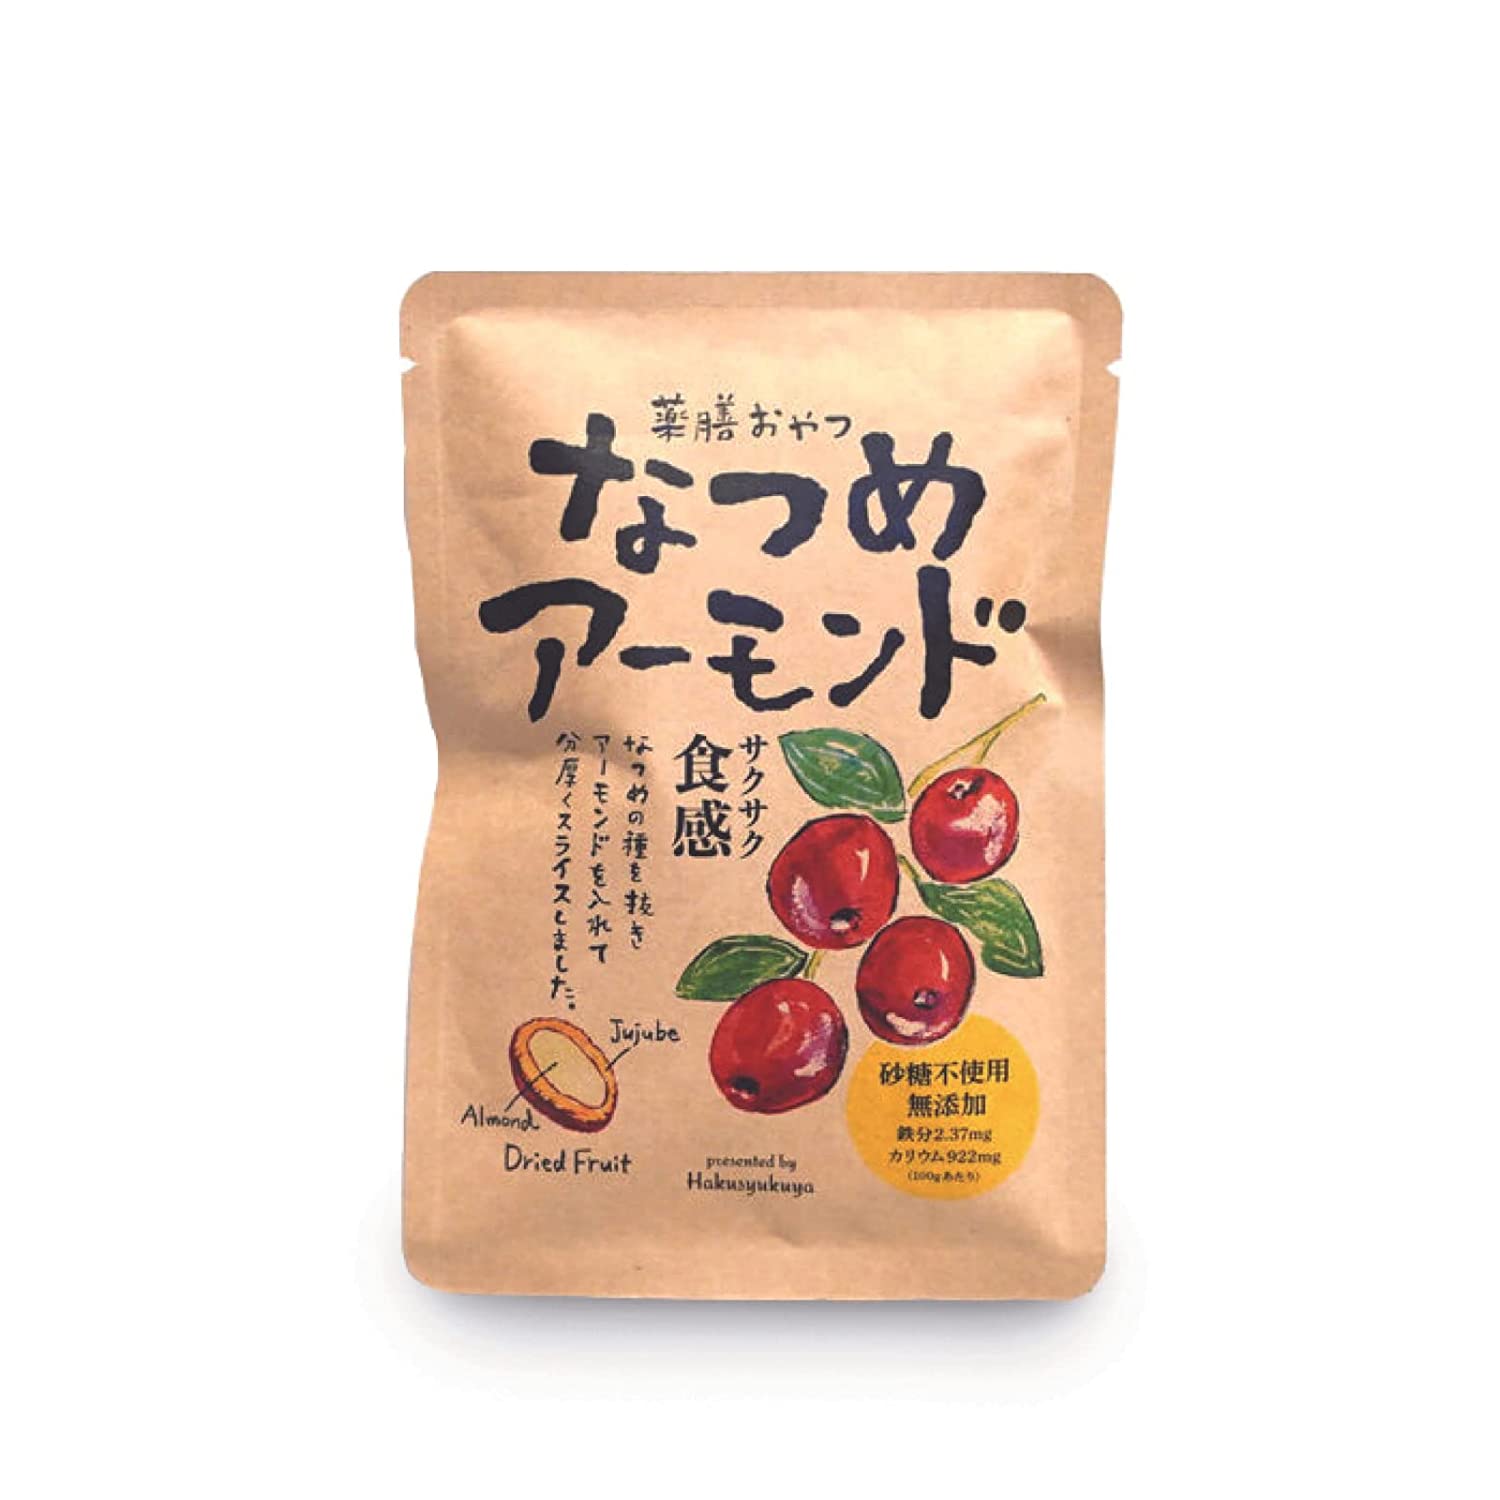 Japanese Company Floods US Market With Traditional Foods.